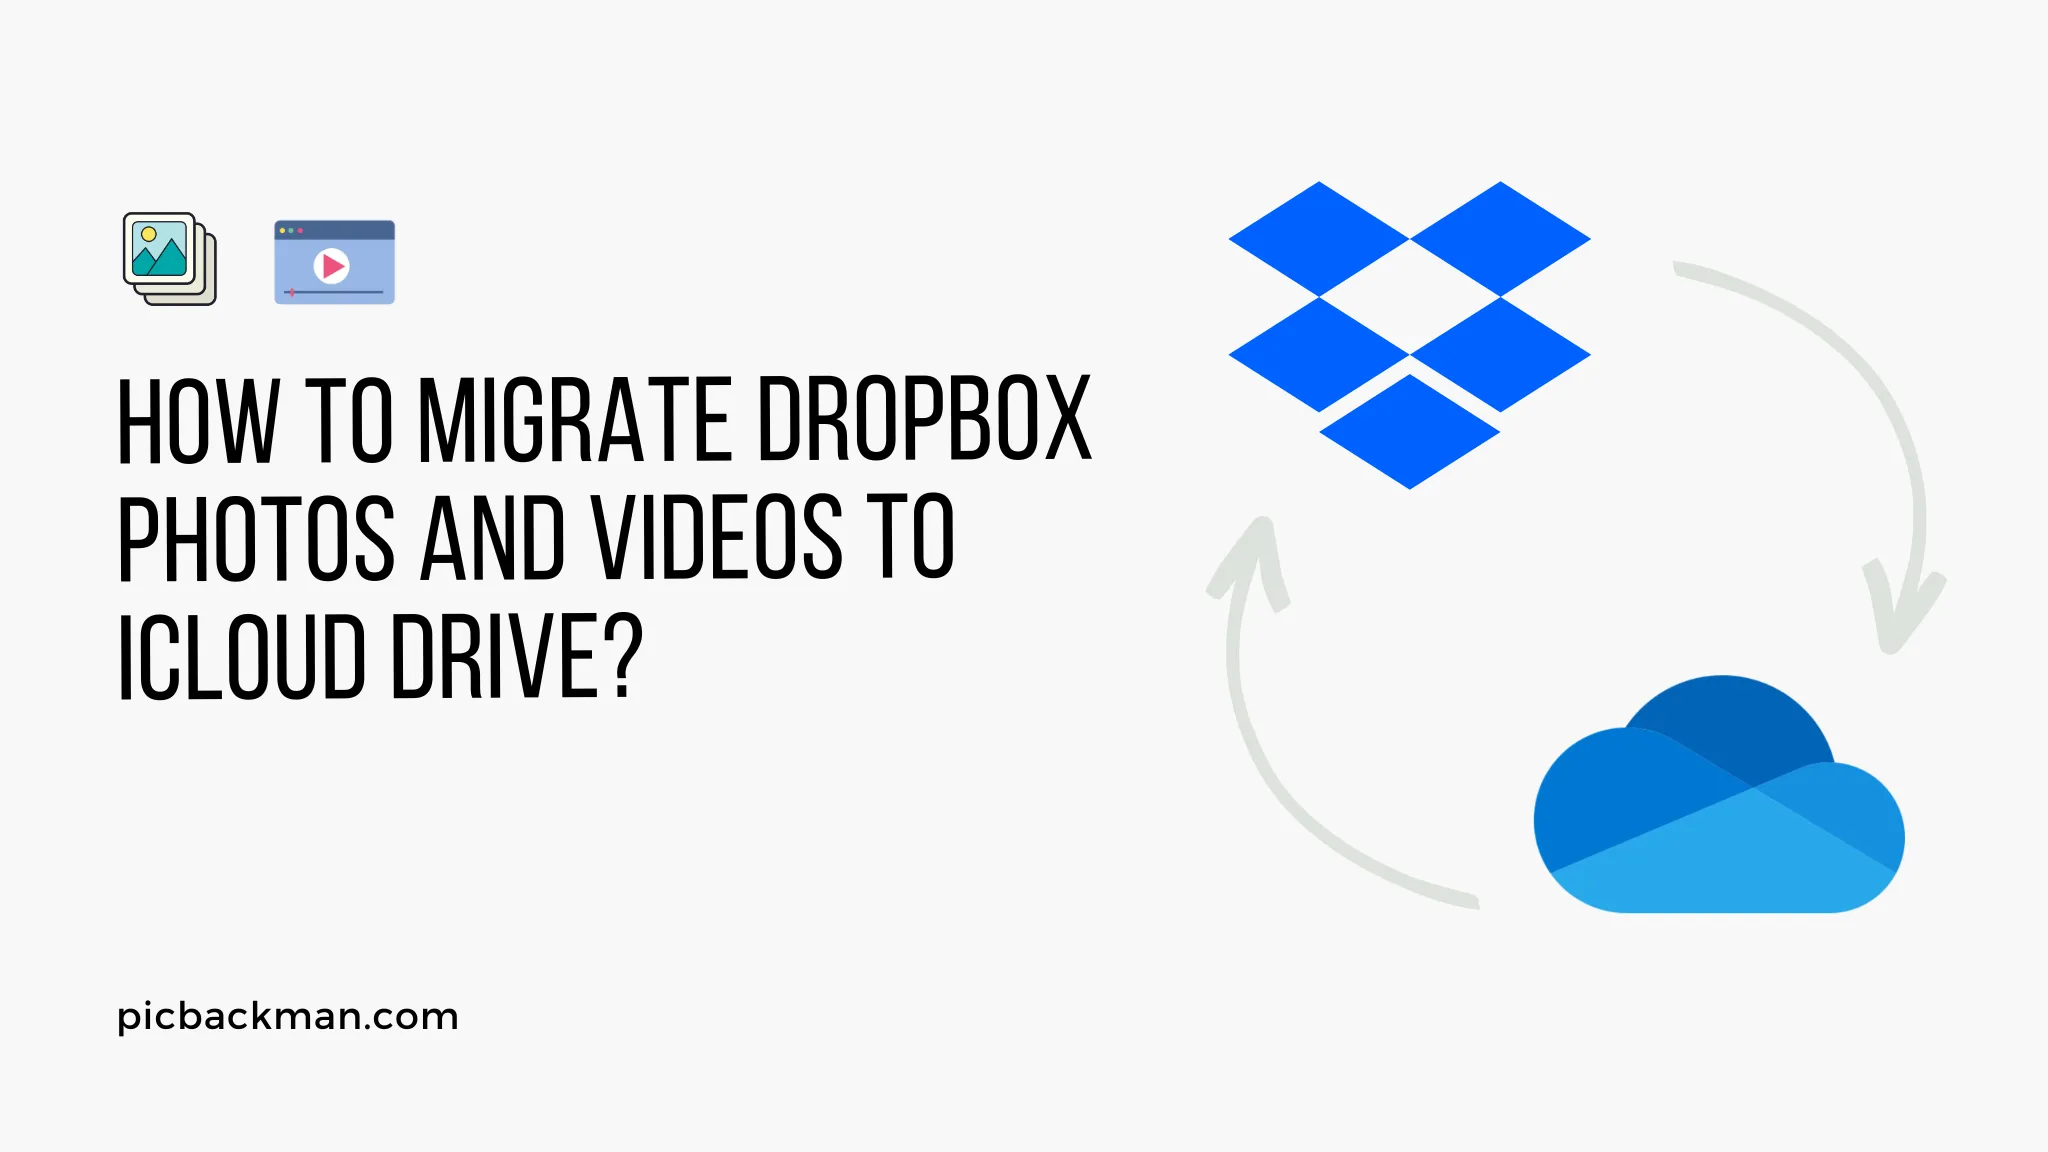 How to Migrate Dropbox Photos and Videos to iCloud Drive?